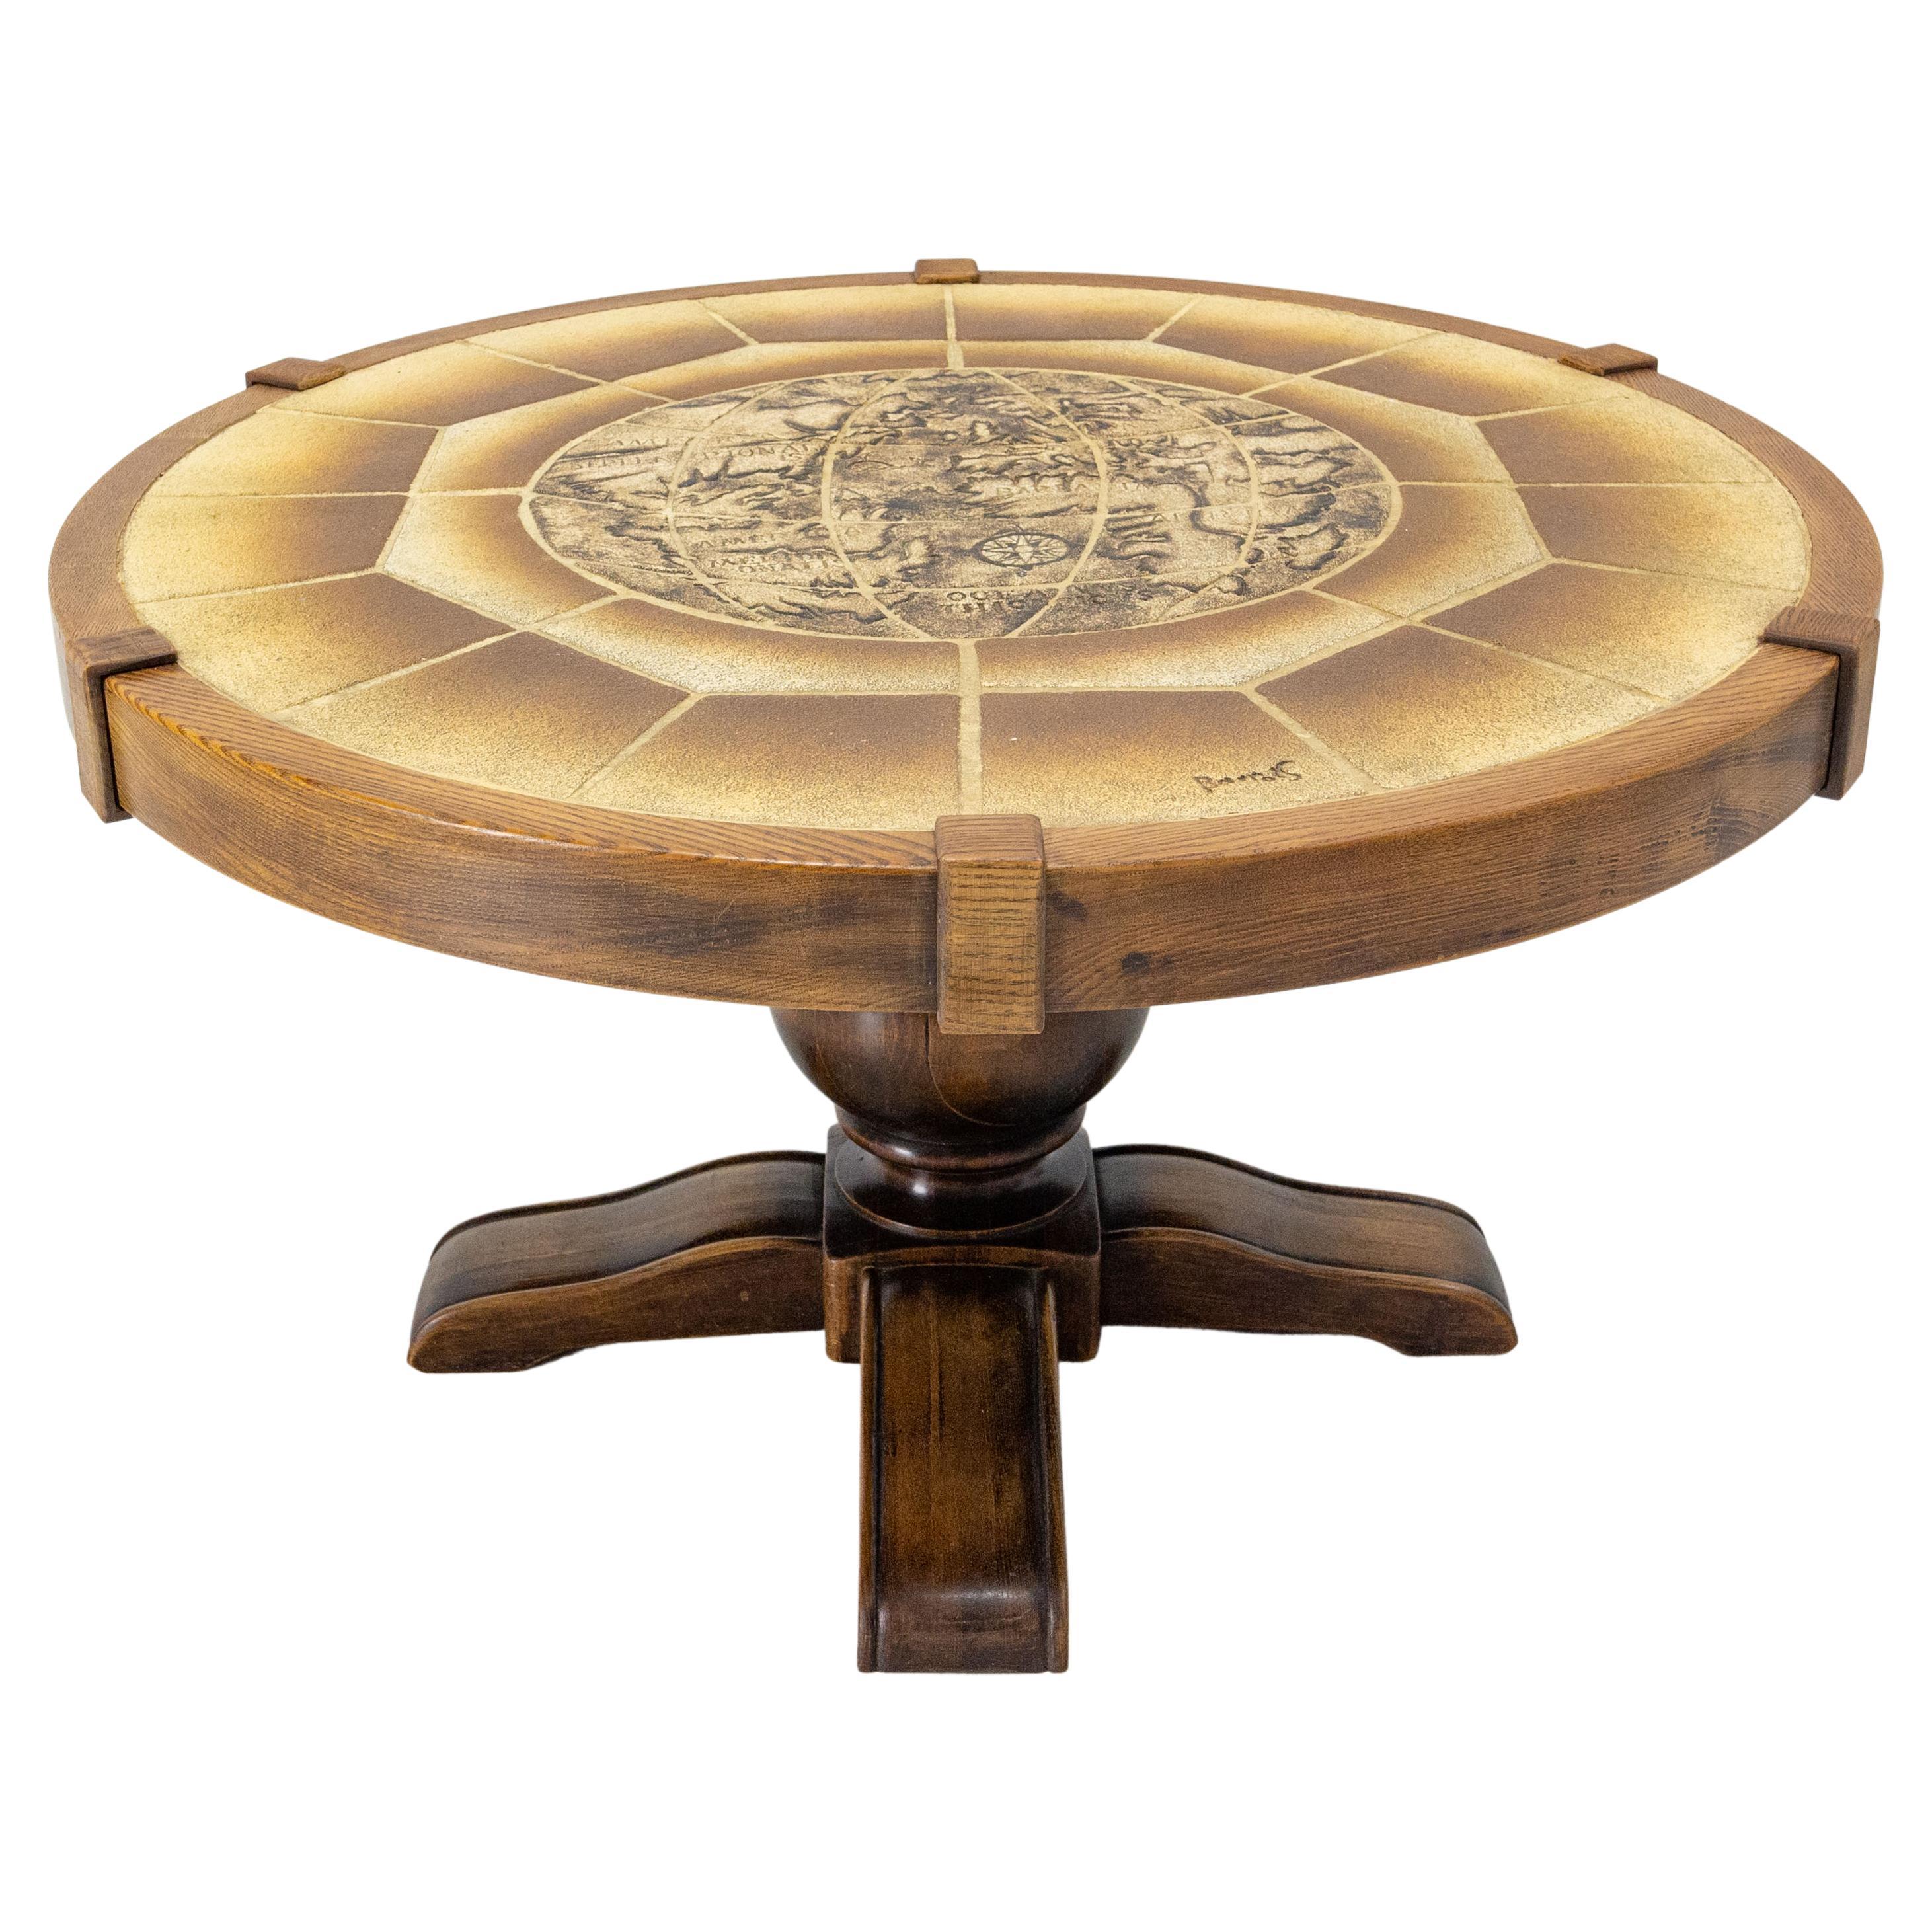 French Round Coffee Table with Vallauris Ceramic World Representation, c. 1970 For Sale